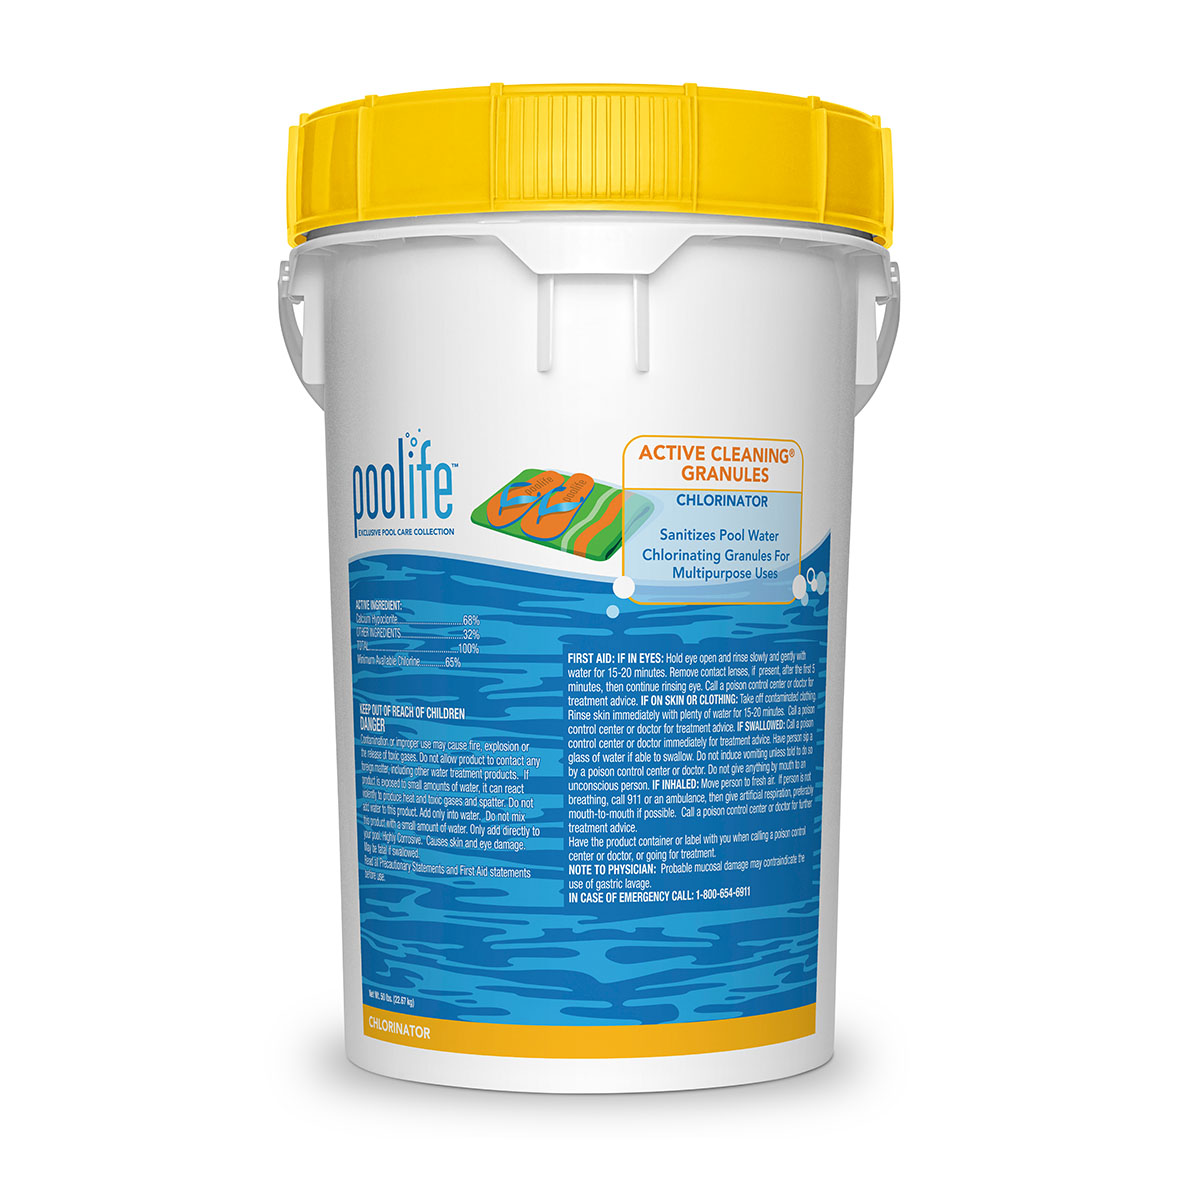 Active Cleaning® Granules Chlorinator